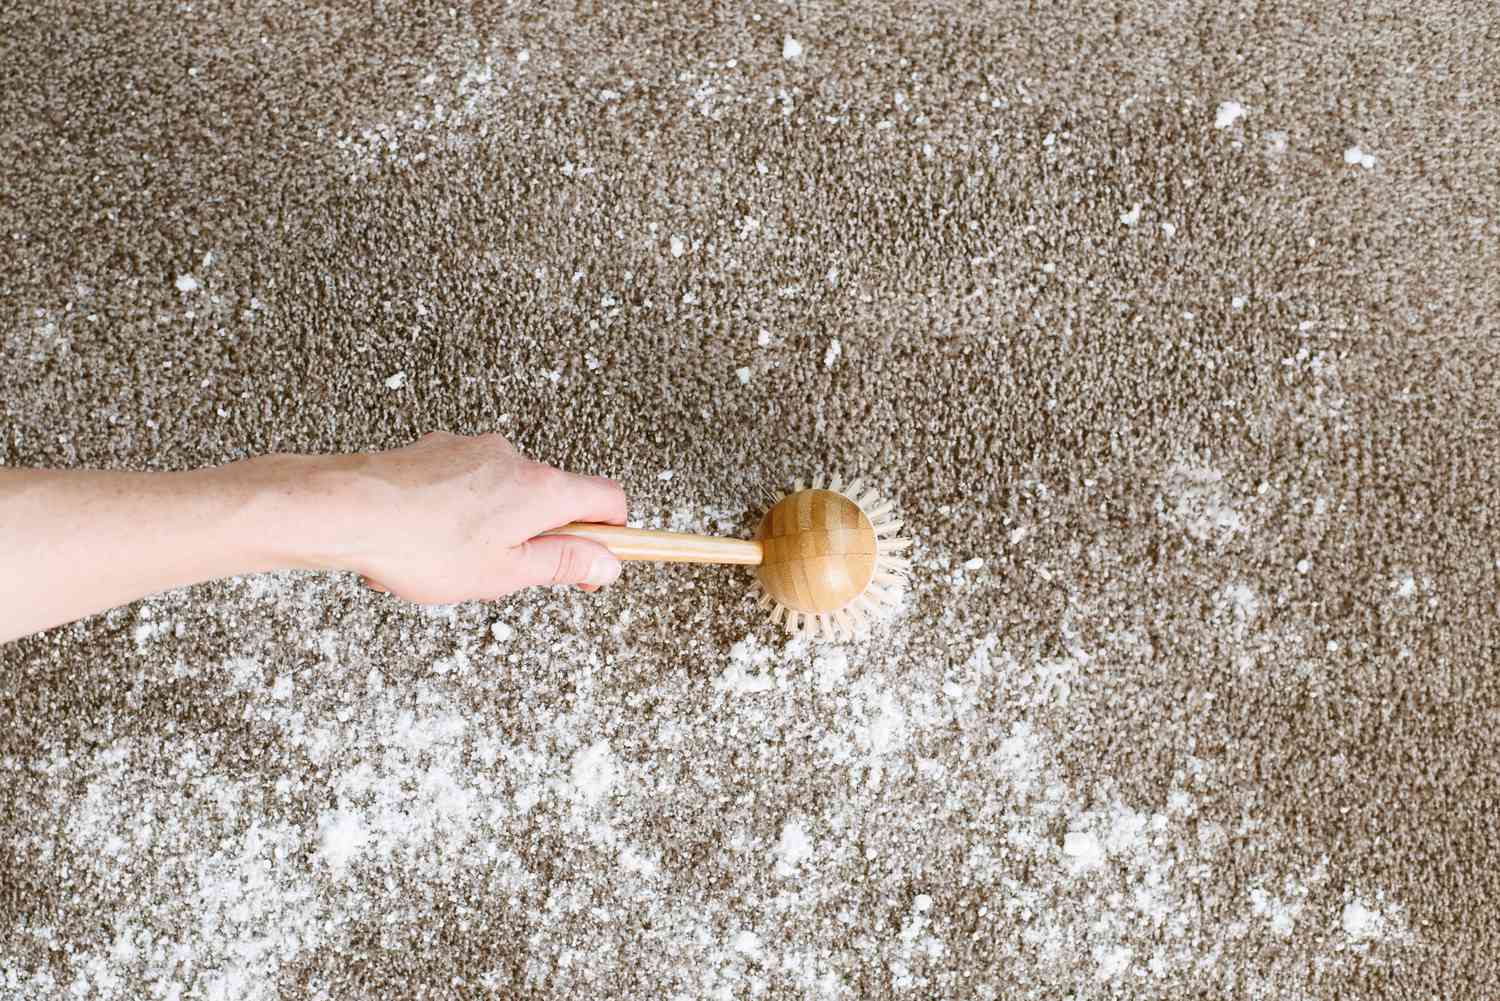 Baking soda and salt sprinkled on tan carpet and brushed with scrub brush